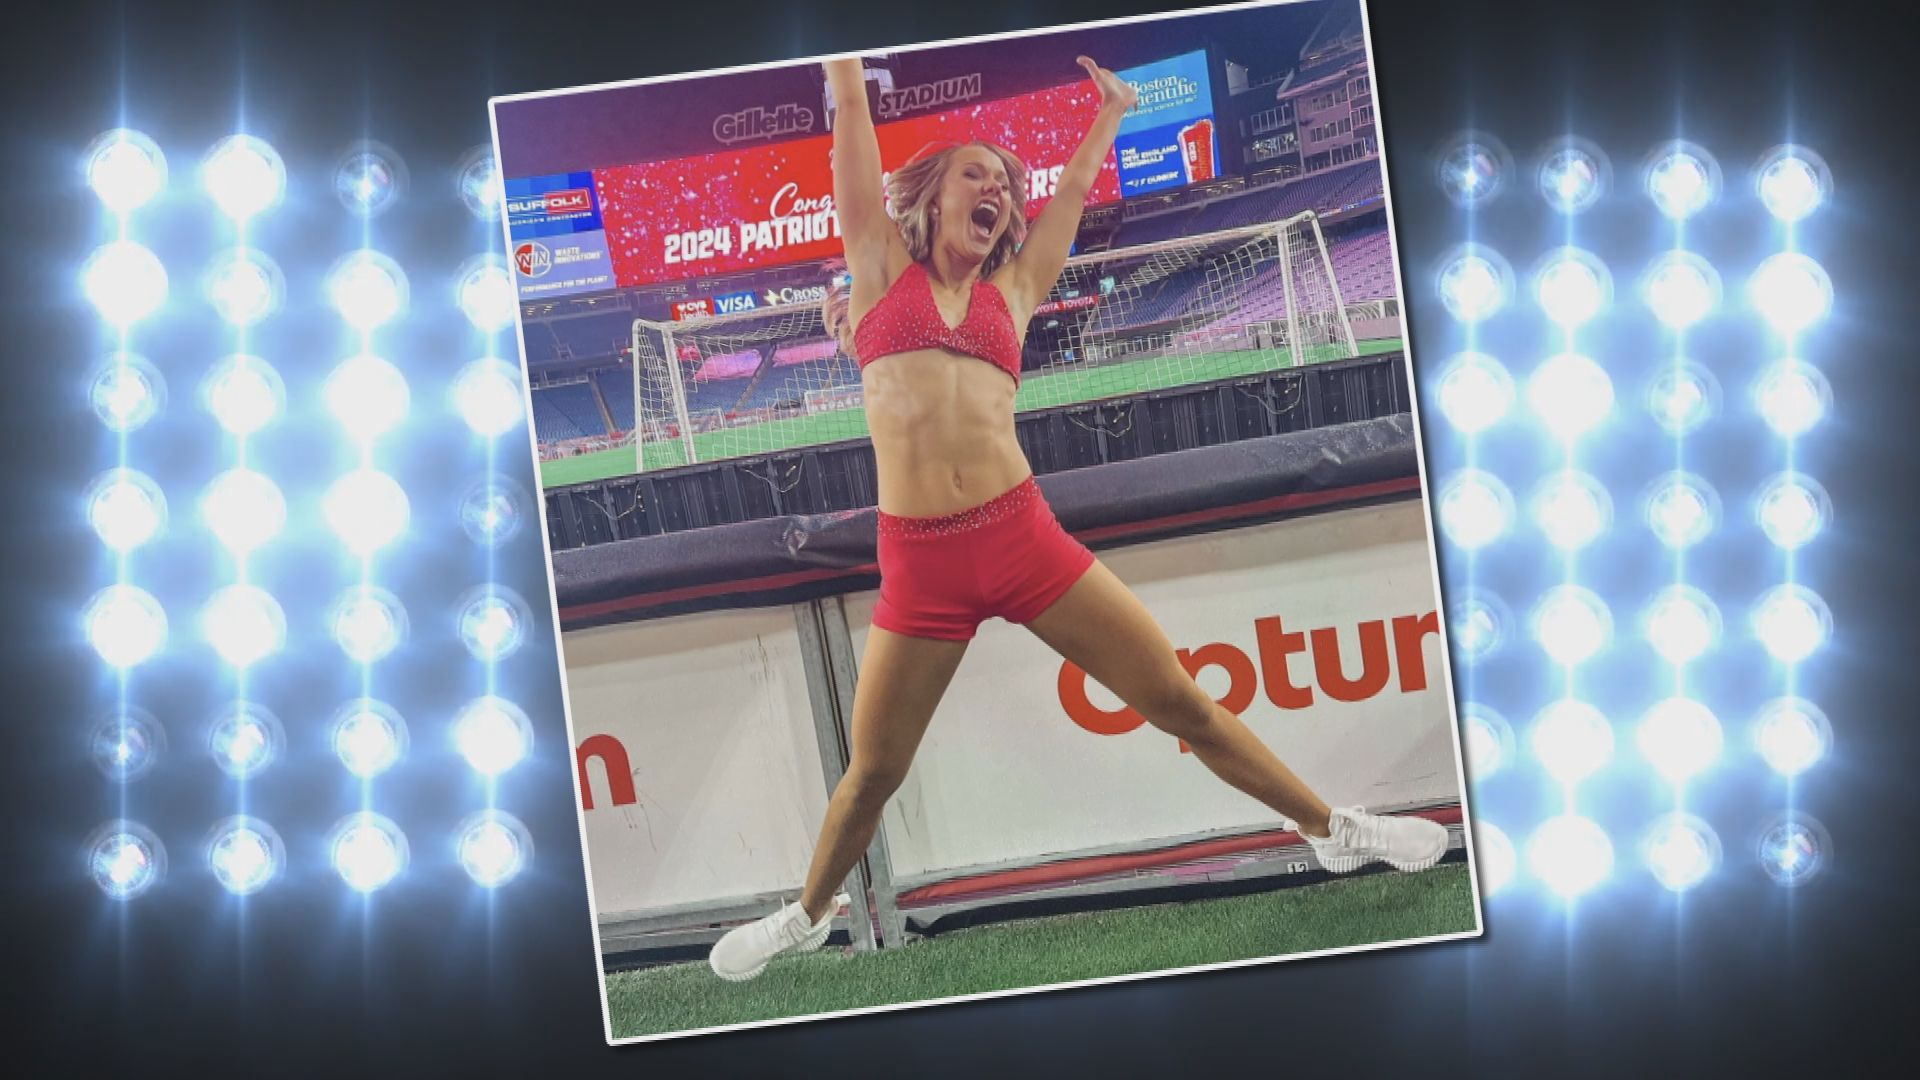 Cheerleader Mallary Quaderer grew up in East Tennessee and fulfilled her dream of becoming a New England Patriots cheerleader.